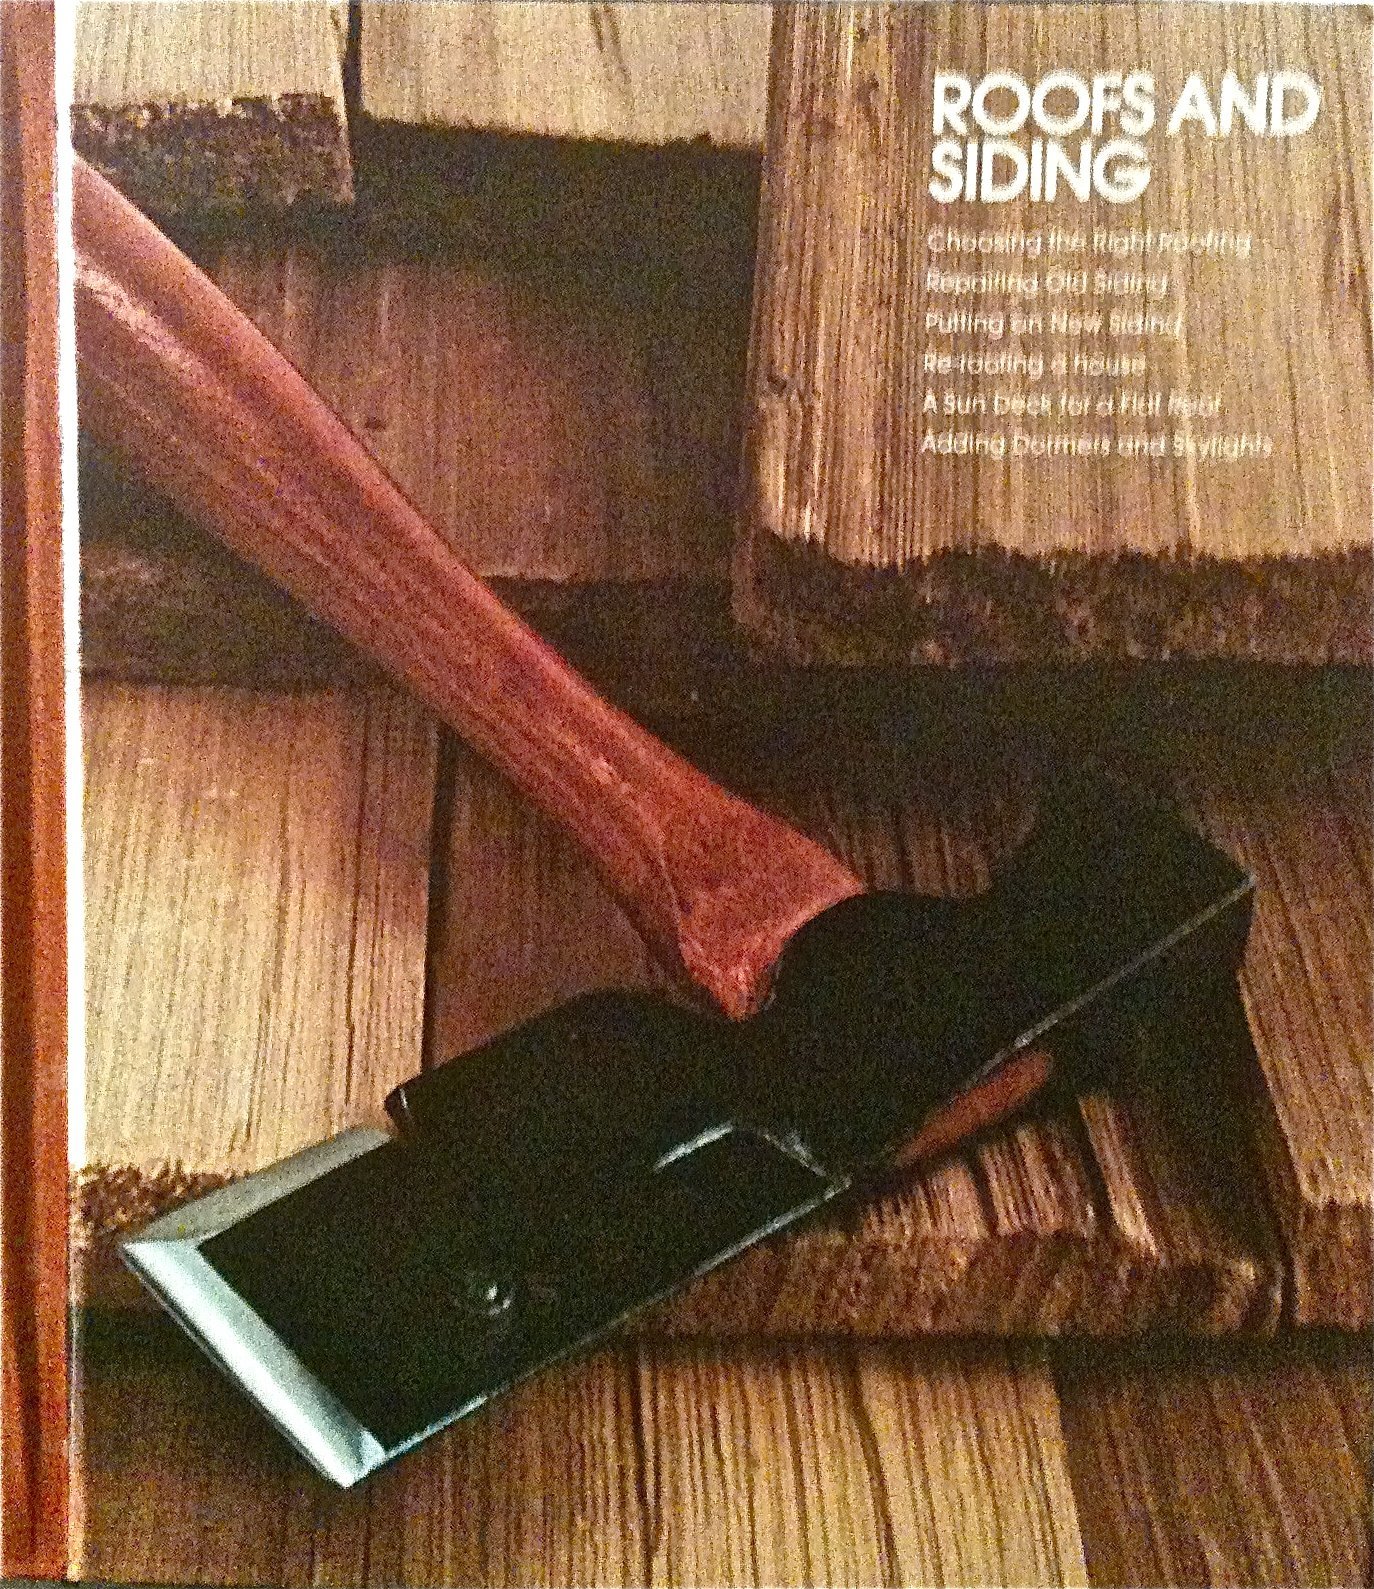 Primary image for Roofs and Siding [Hardcover] Editors Of Time-Life Books